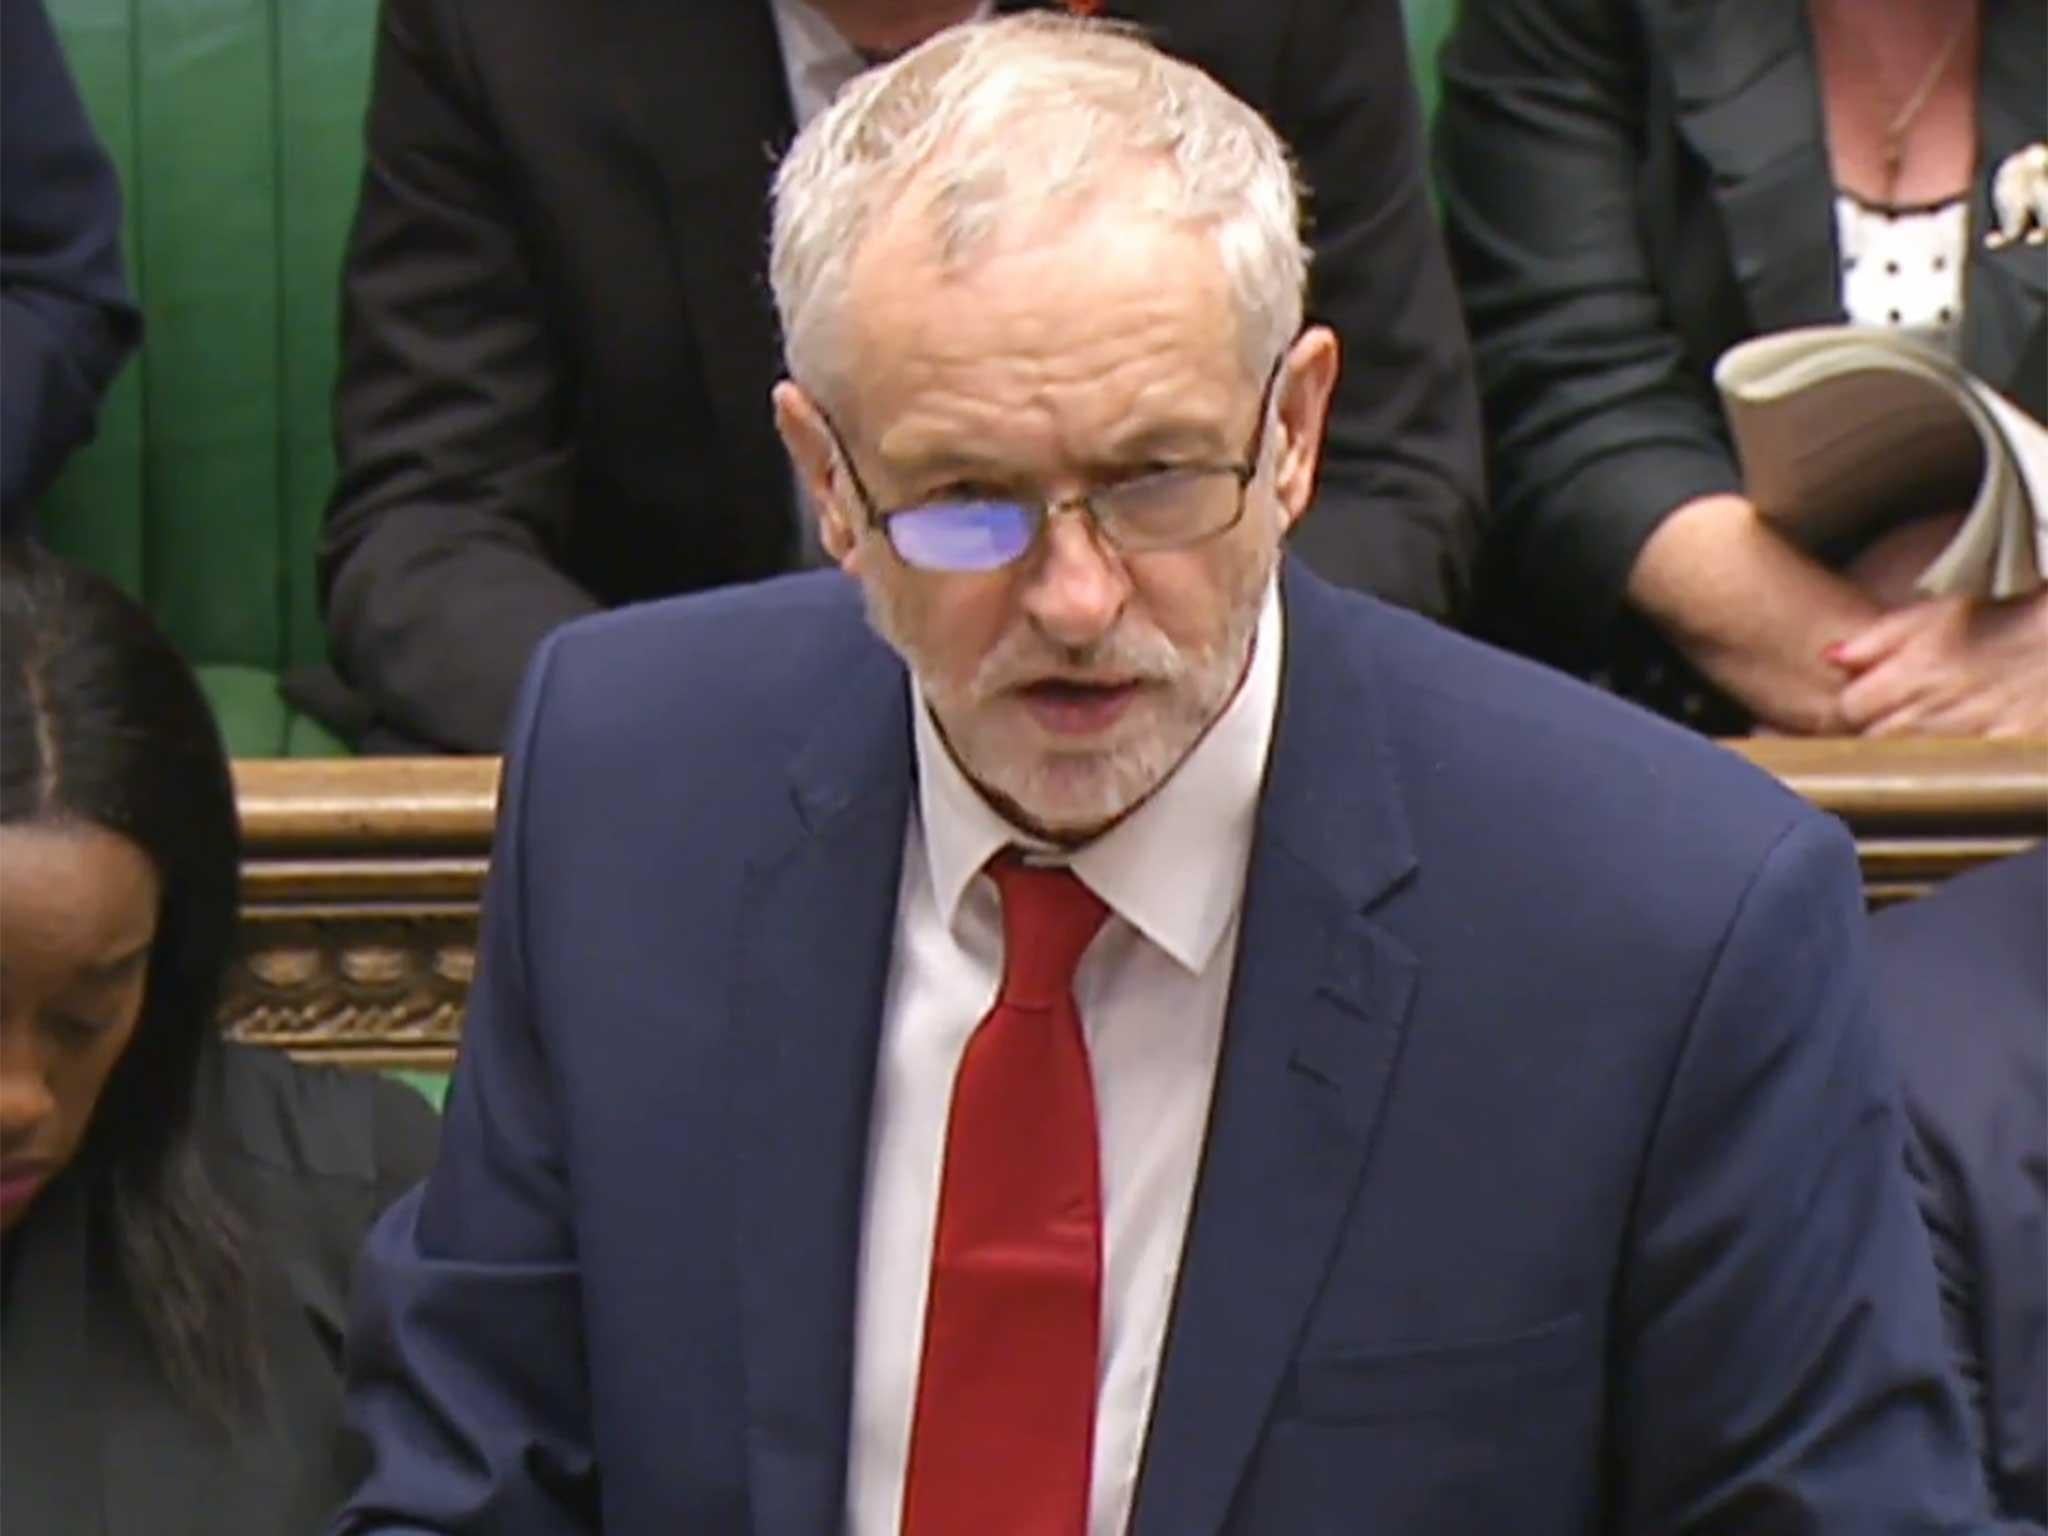 &#13;
Despite resignations from his Shadow Cabinet, Labour leader Jeremy Corbyn refuses to step down&#13;